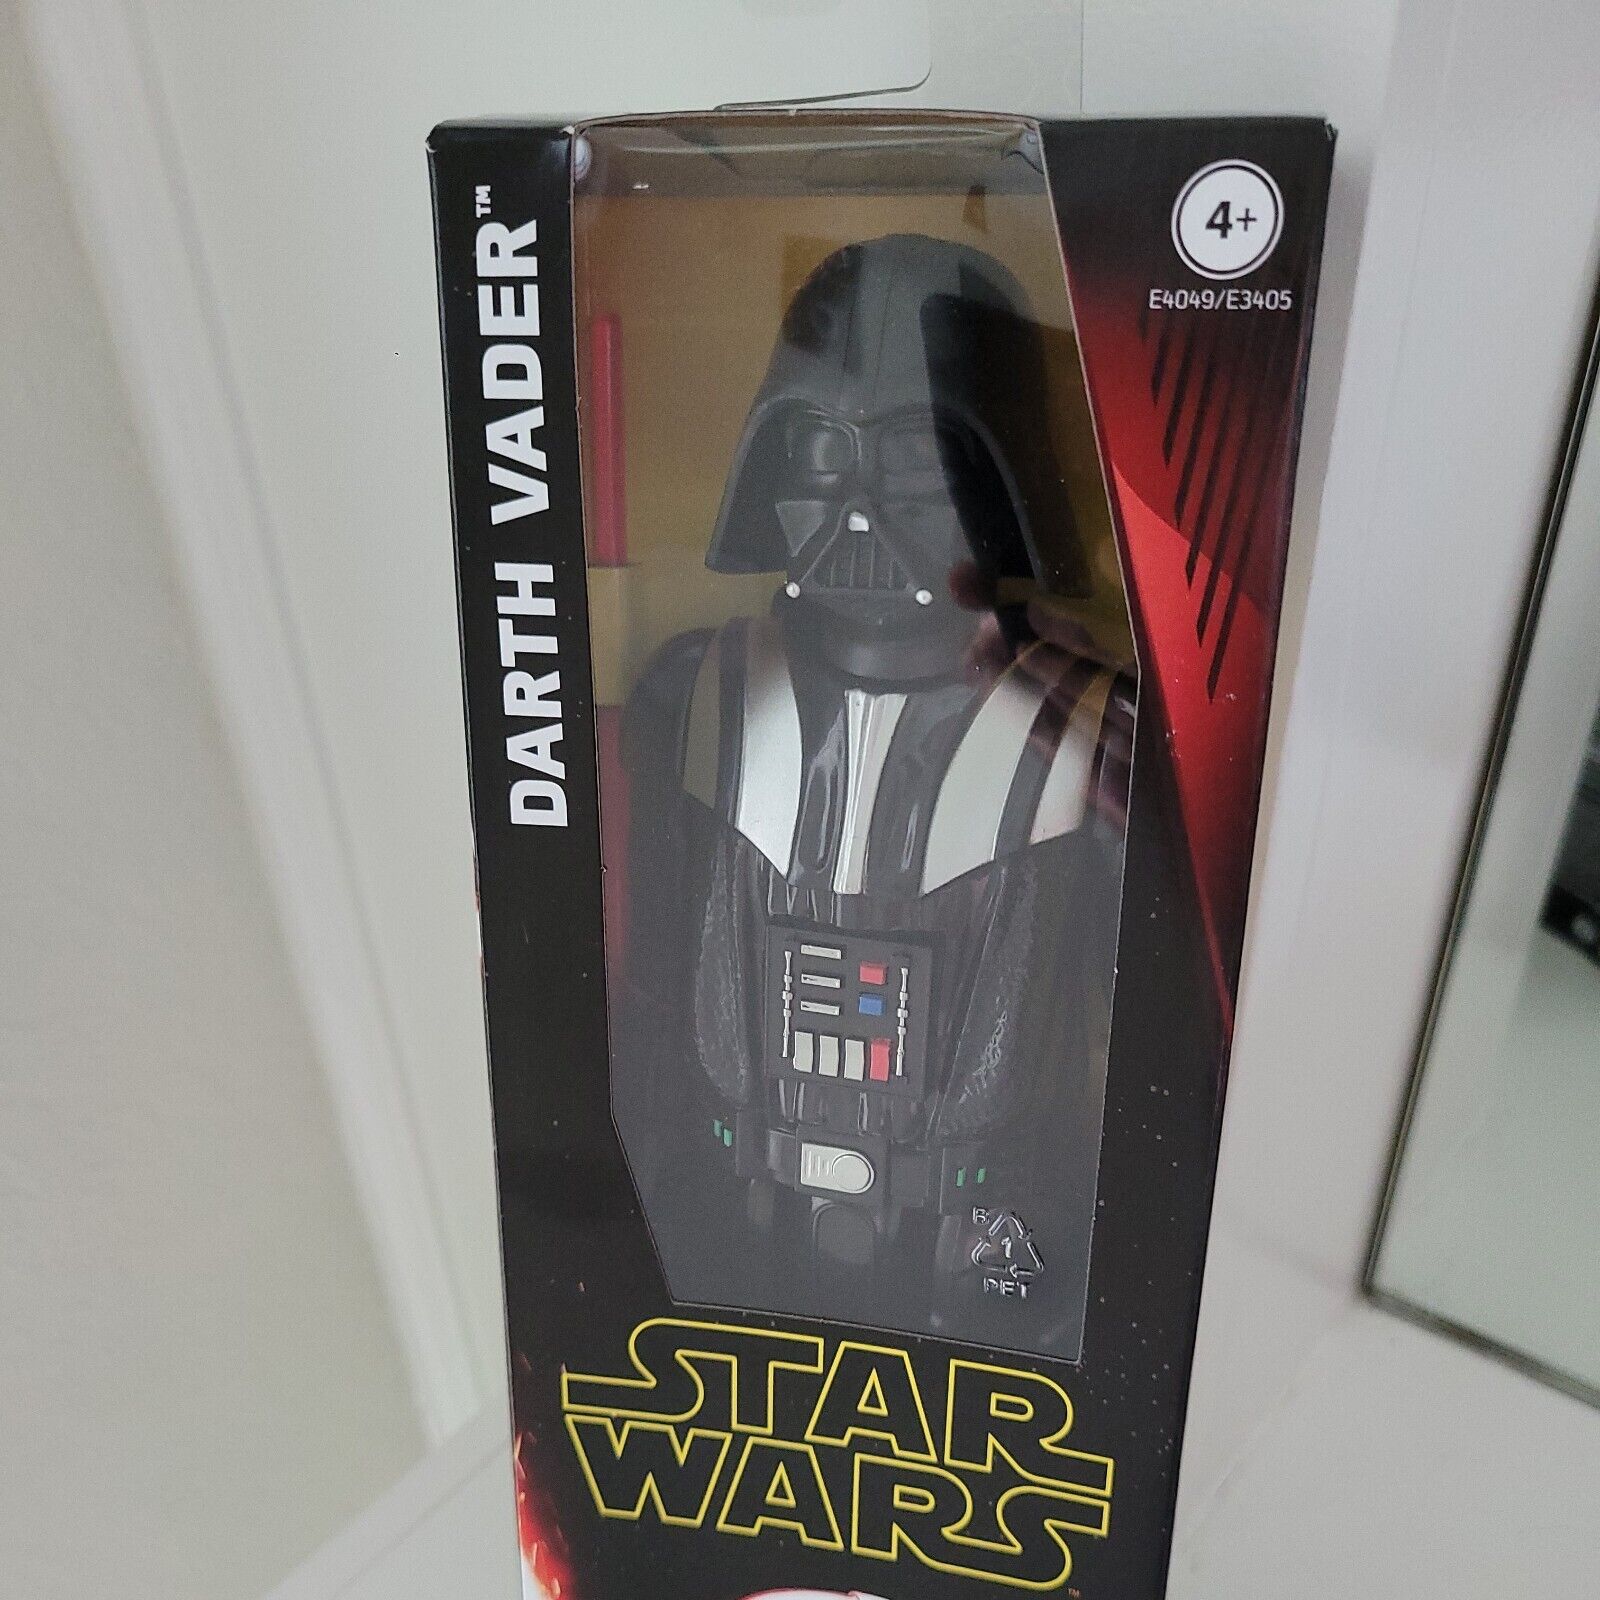 Star Wars Darth Vader 12-Inch Action Figure The Rise Of Skywalker NEW  Hasbro E4049